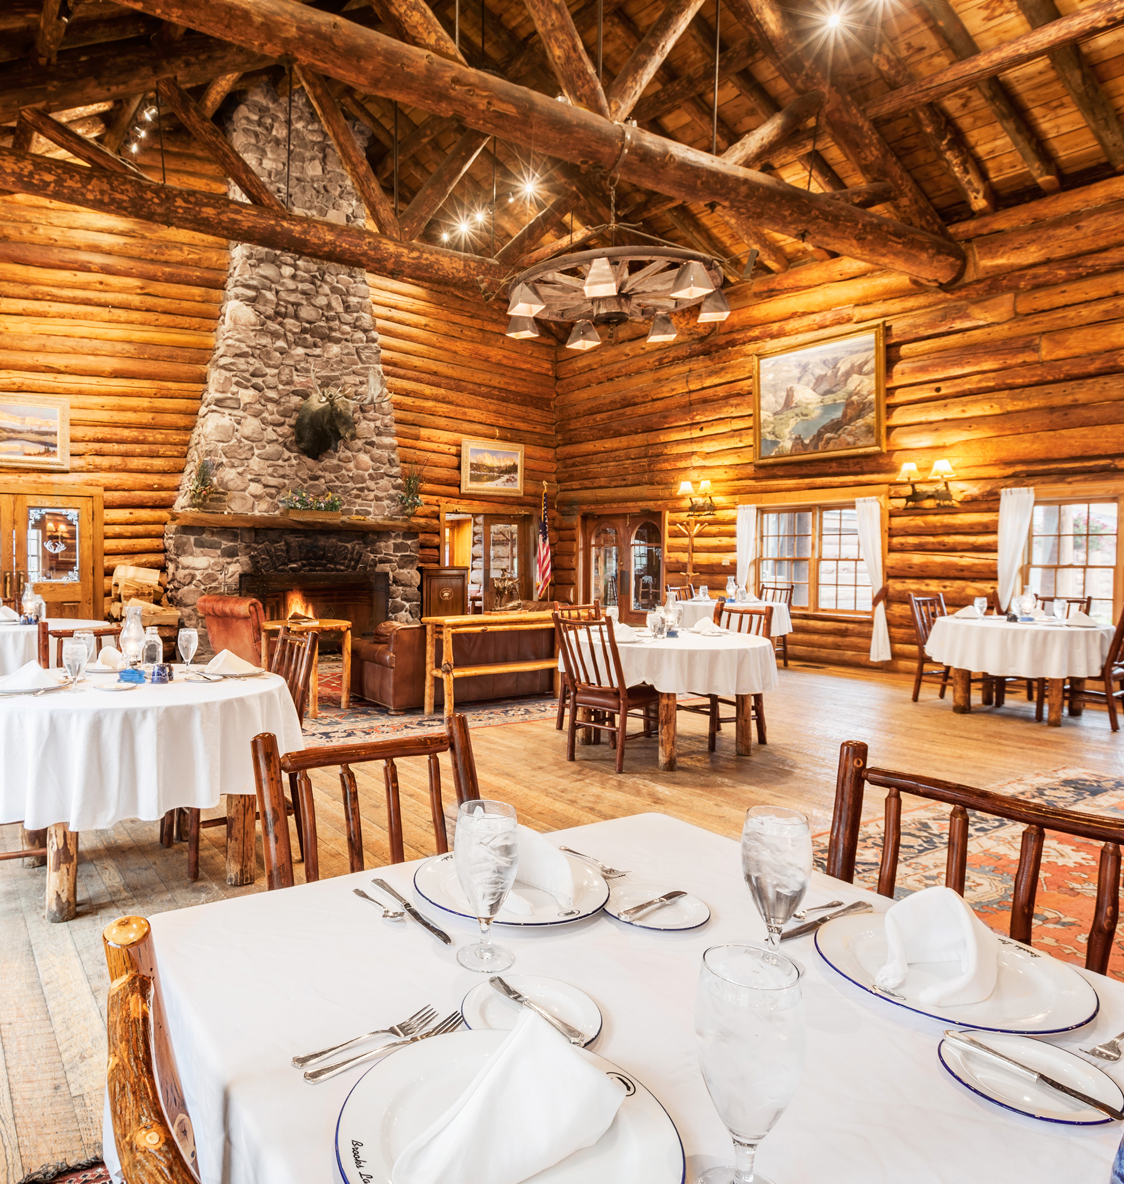 The historic Dining Hall is the gathering place for the all-included gourmet meals prepared by Brooks Lake Lodge’s Executive Chef Whitney Hall.